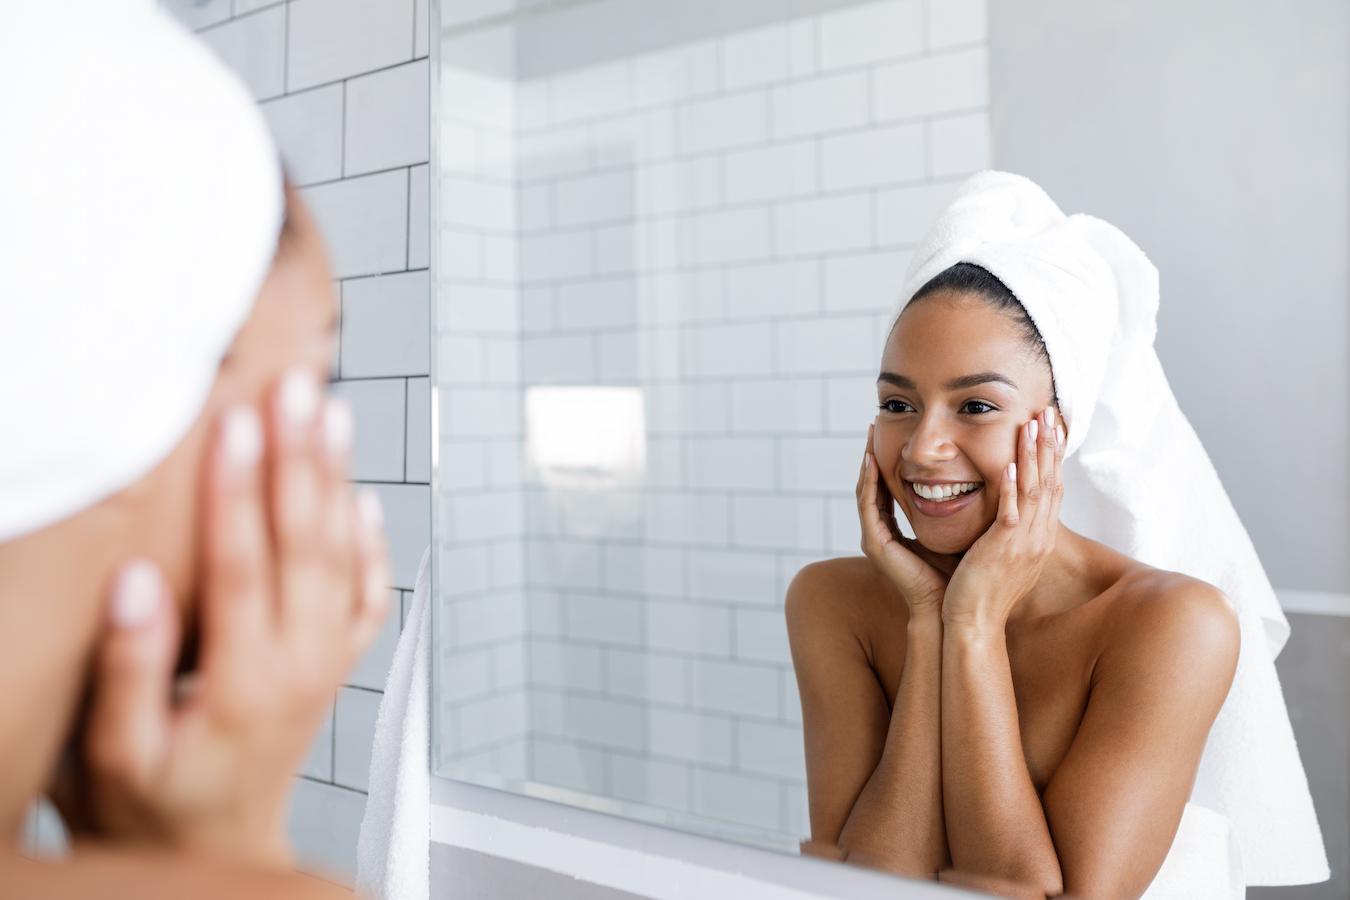 Facial toner should be part of your daily skin care routine